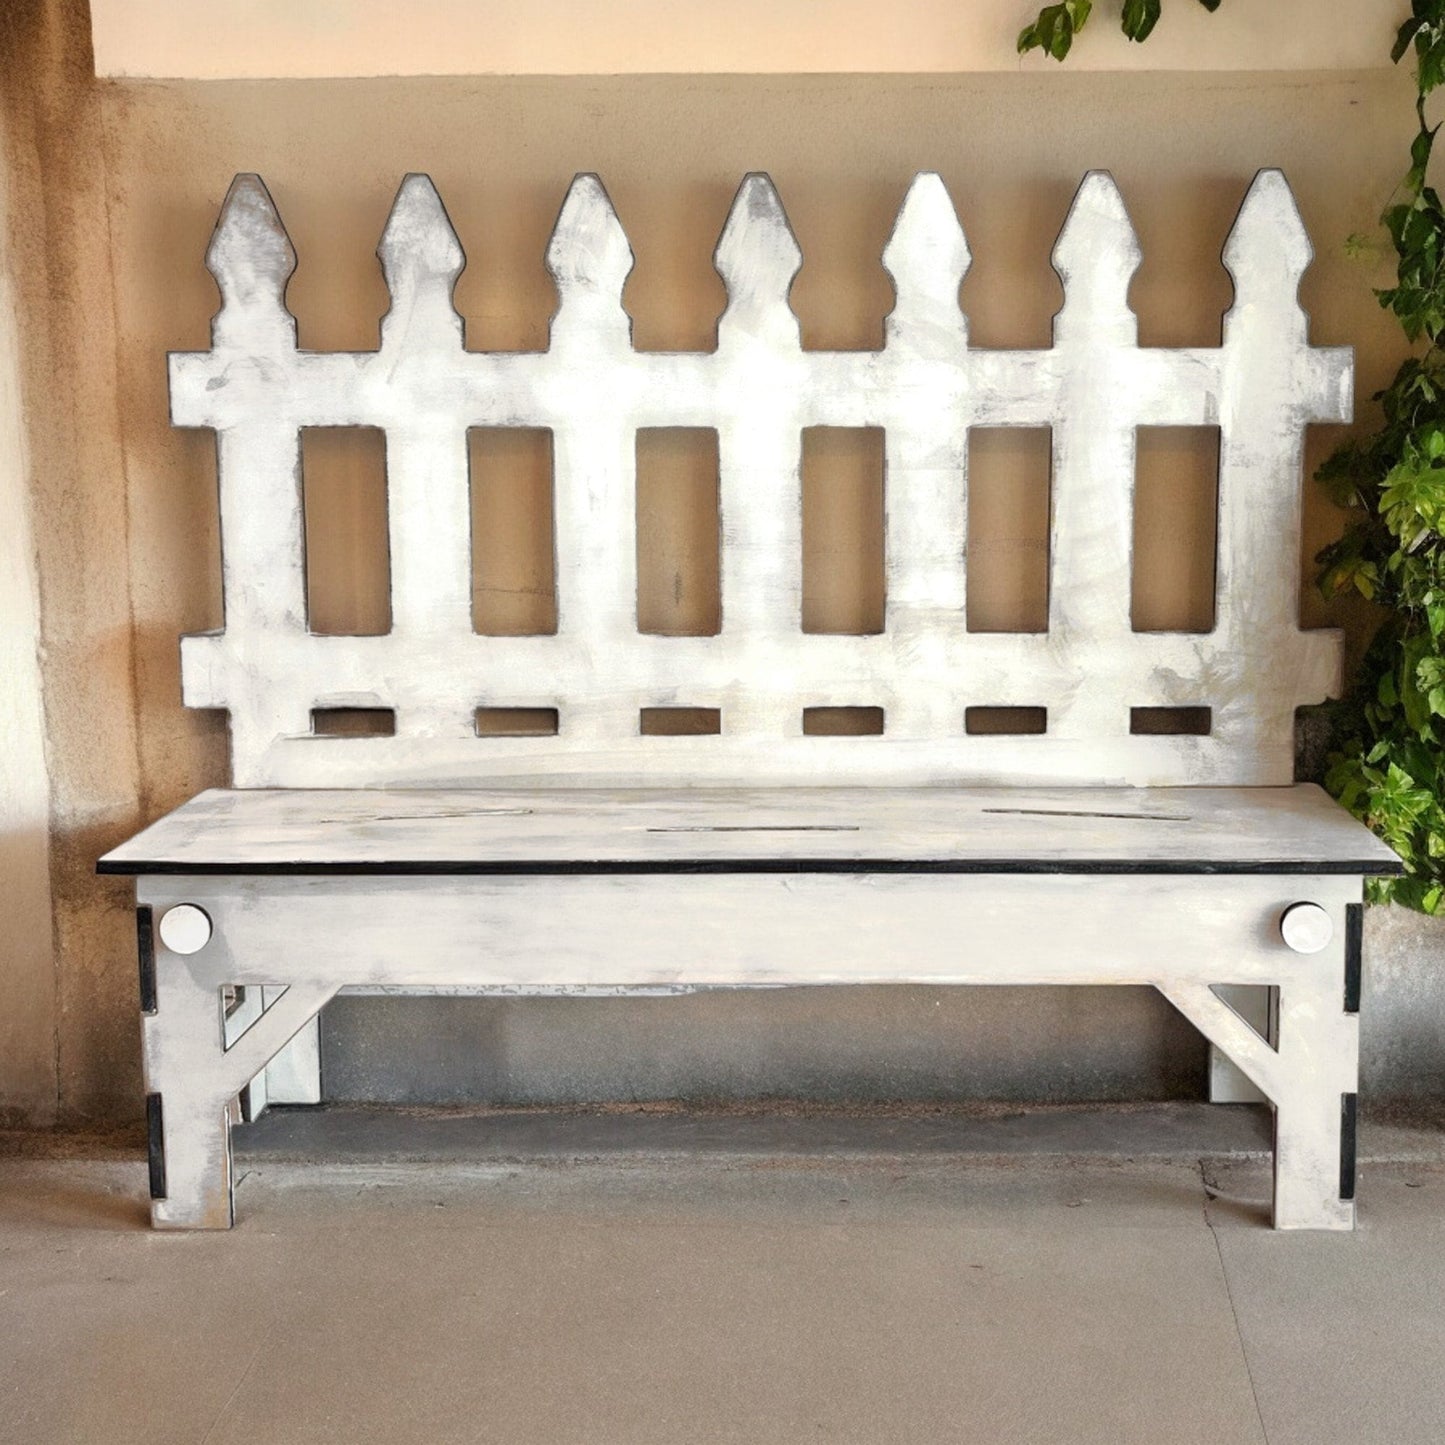 a white wooden bench sitting in front of a wall